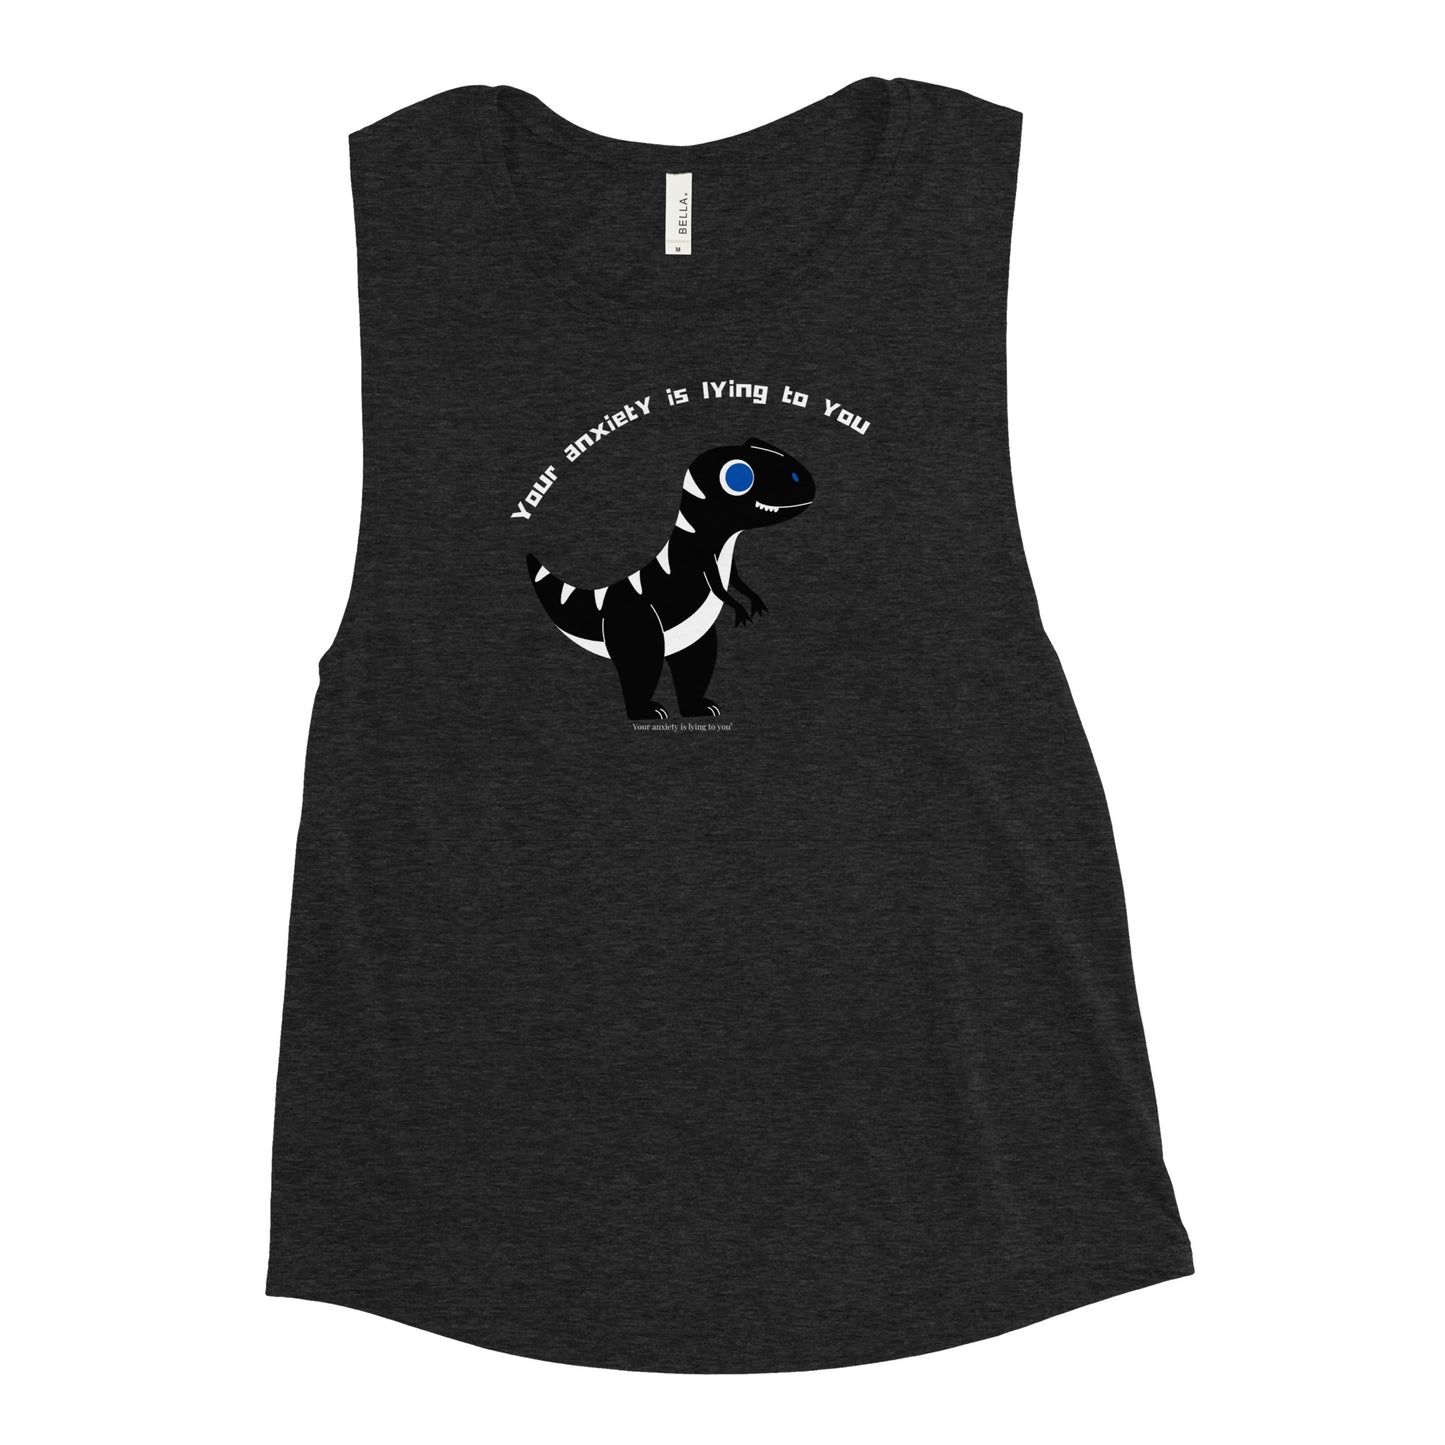 Your anxiety is lying to you®  Ladies’ Muscle Tank